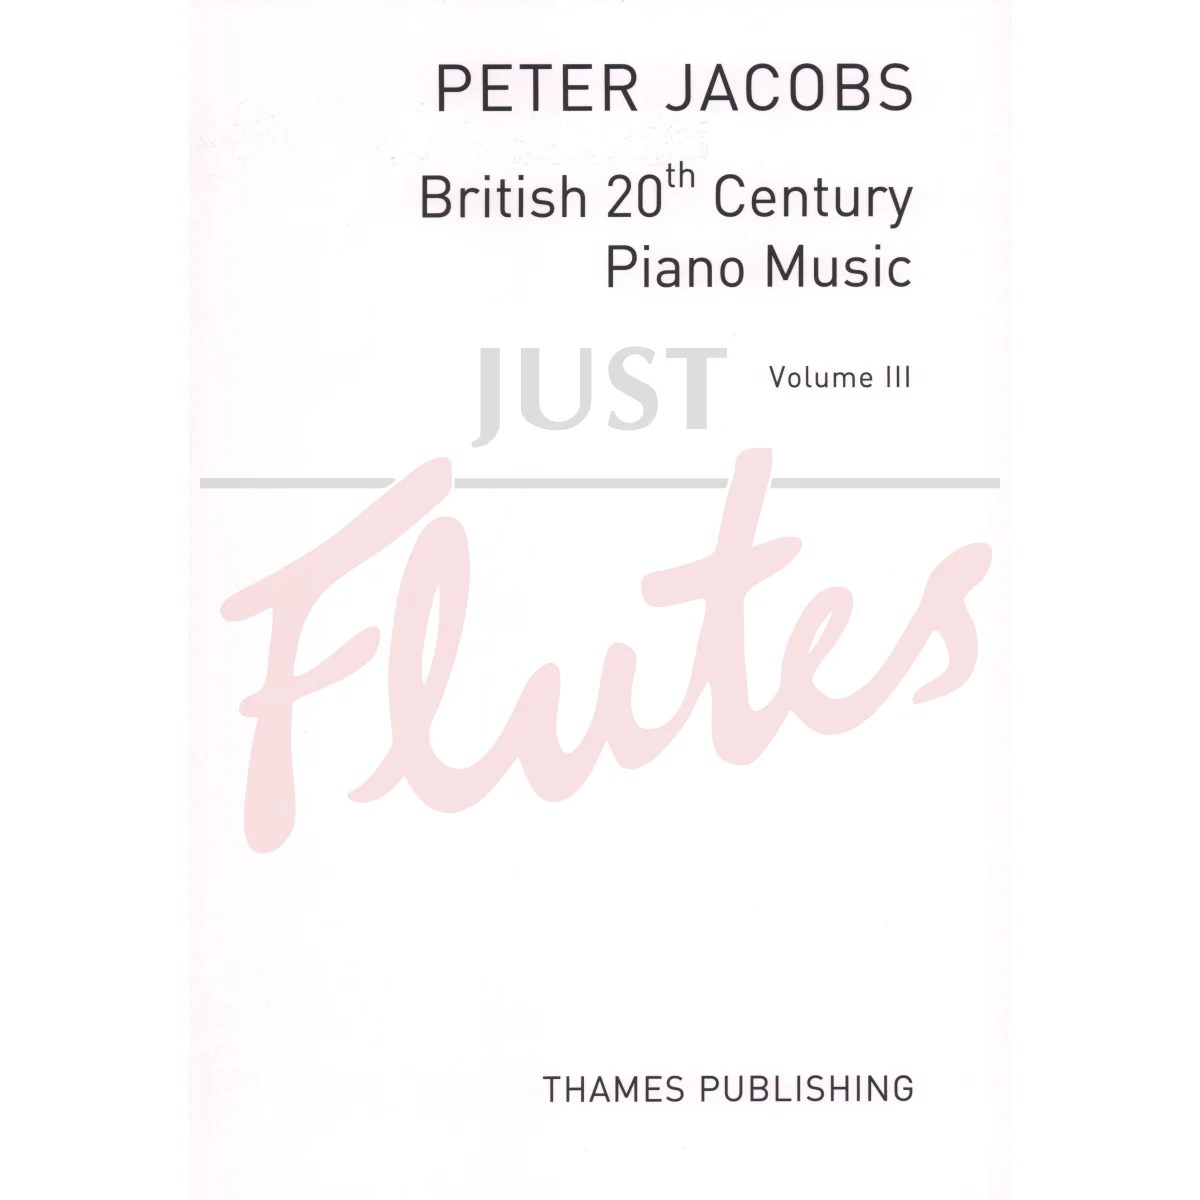 An Anthology of British 20th Century Piano Music Vol 3